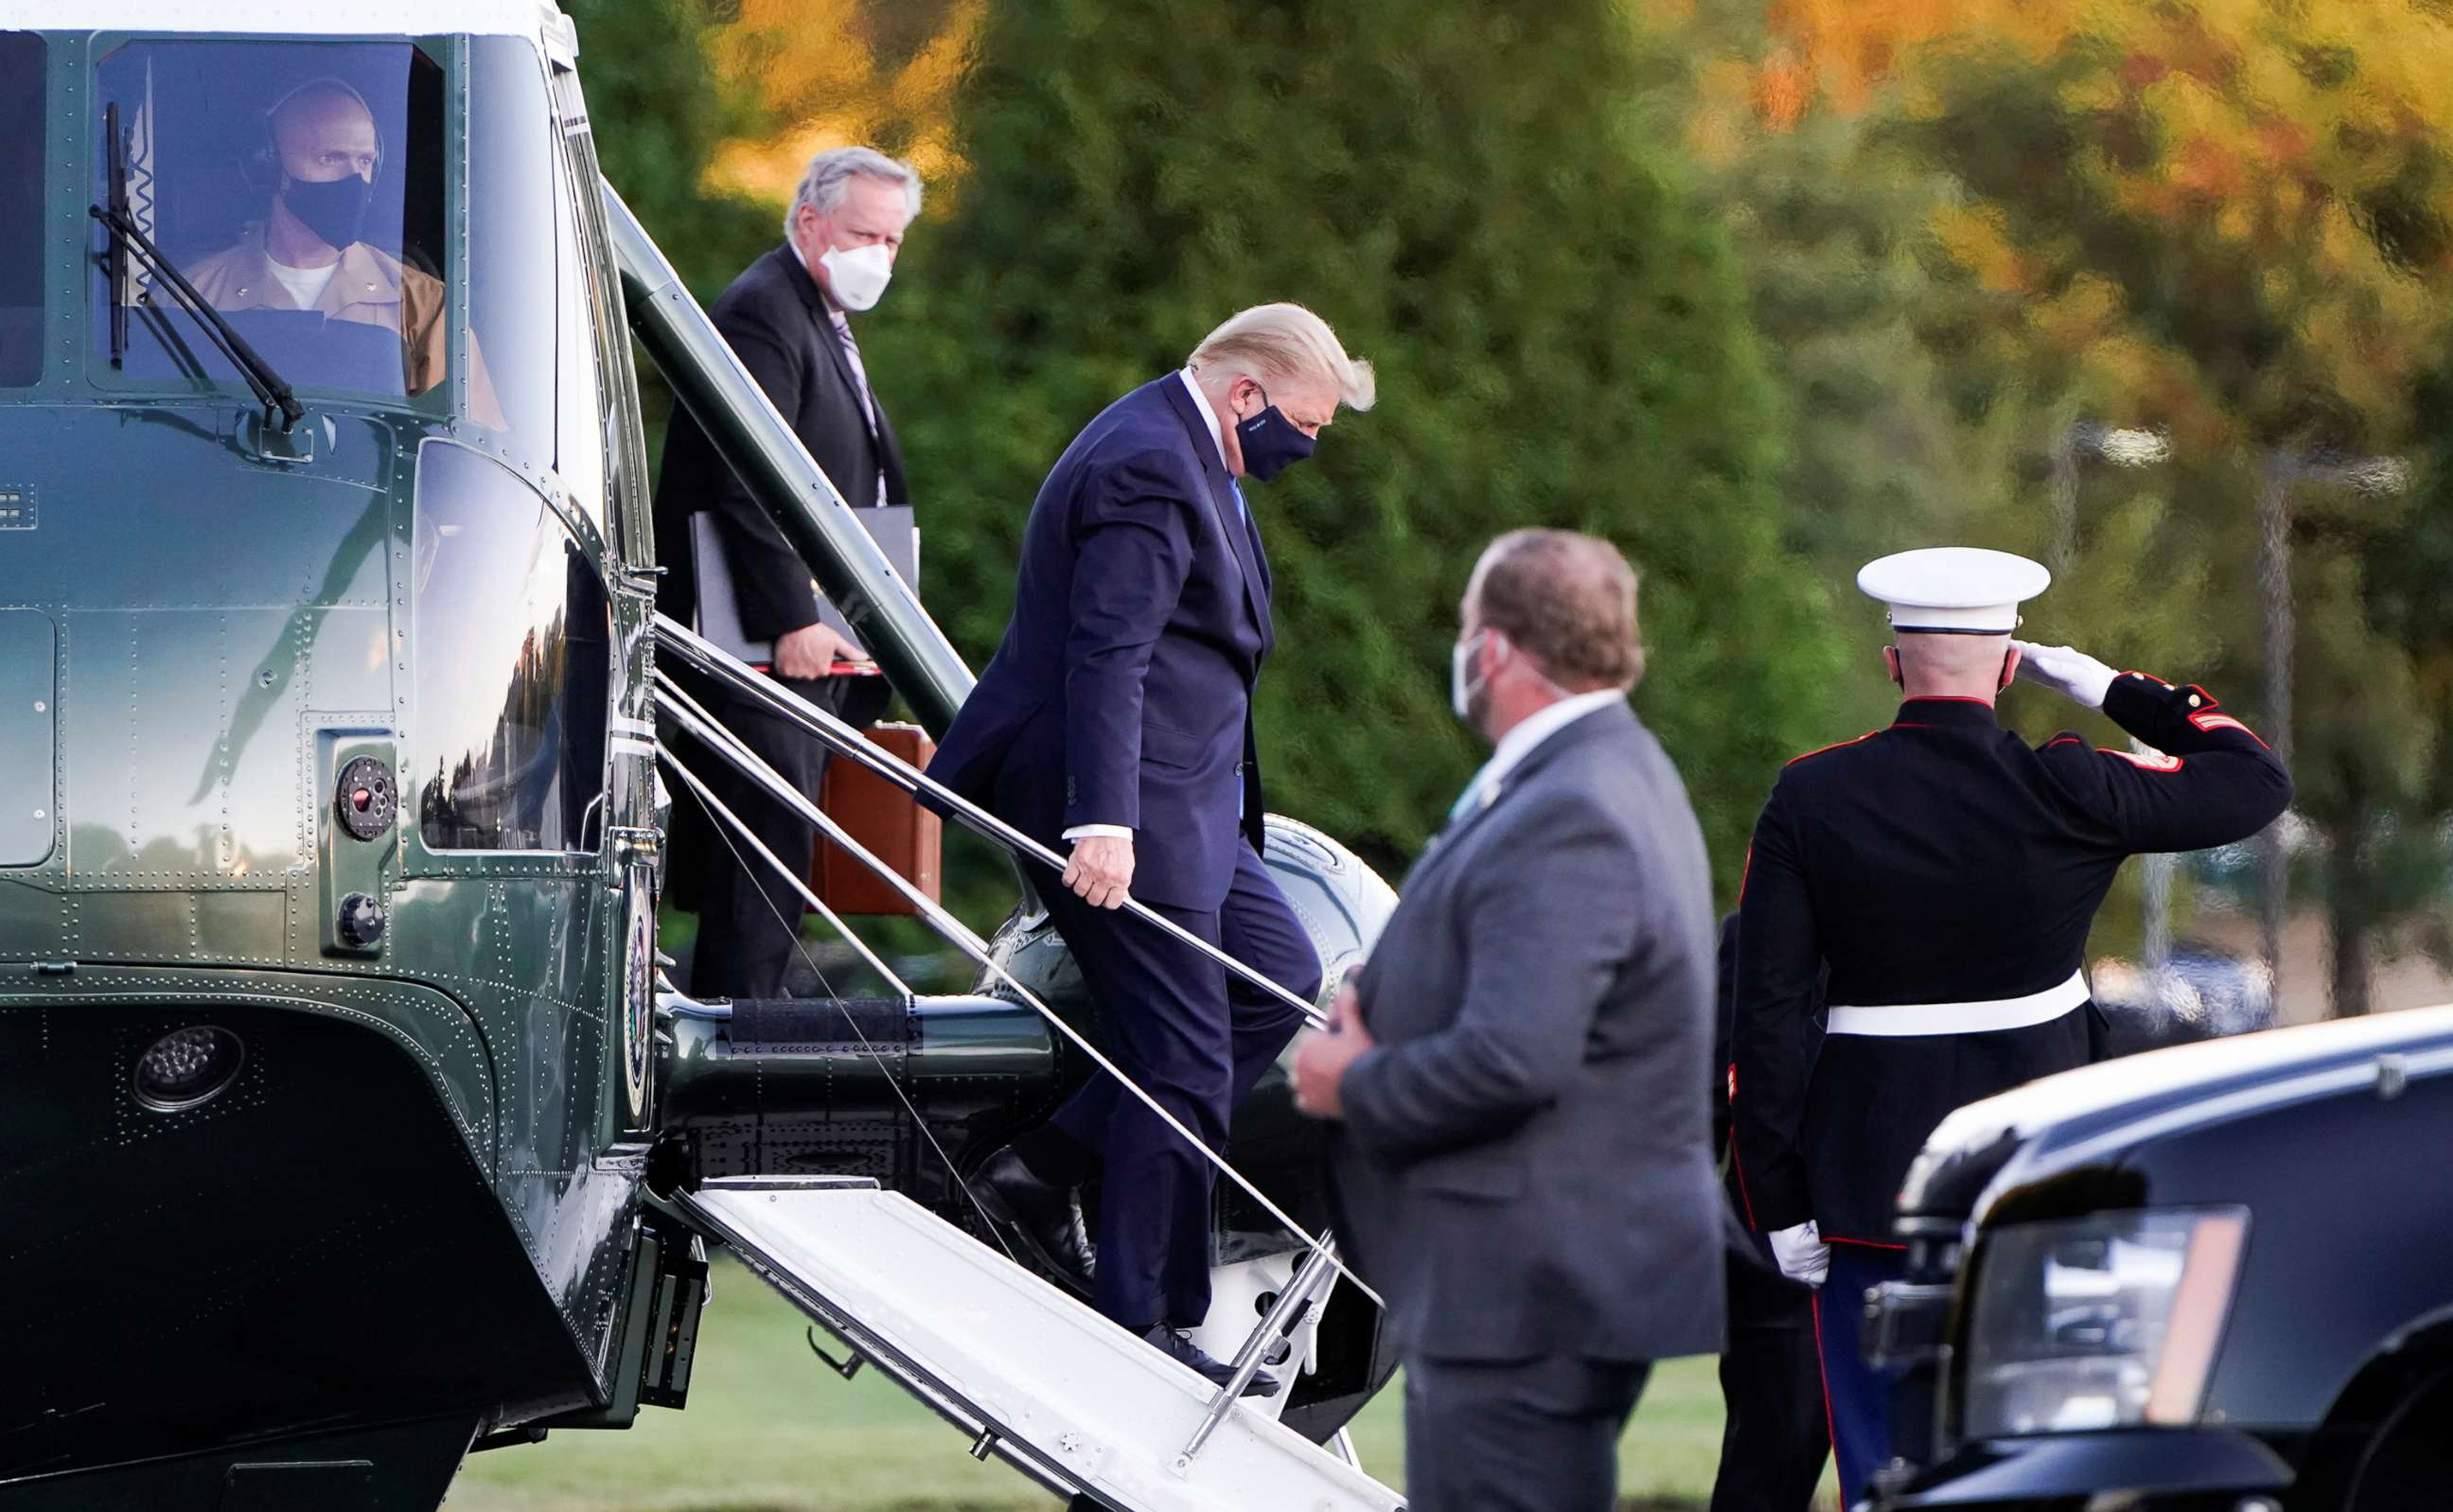 PHOTO: President Donald Trump disembarks from the Marine One helicopter followed by White House Chief of Staff Mark Meadows as he arrives at Walter Reed after testing positive for COVID-19, in Bethesda, Md., Oct. 2, 2020.  